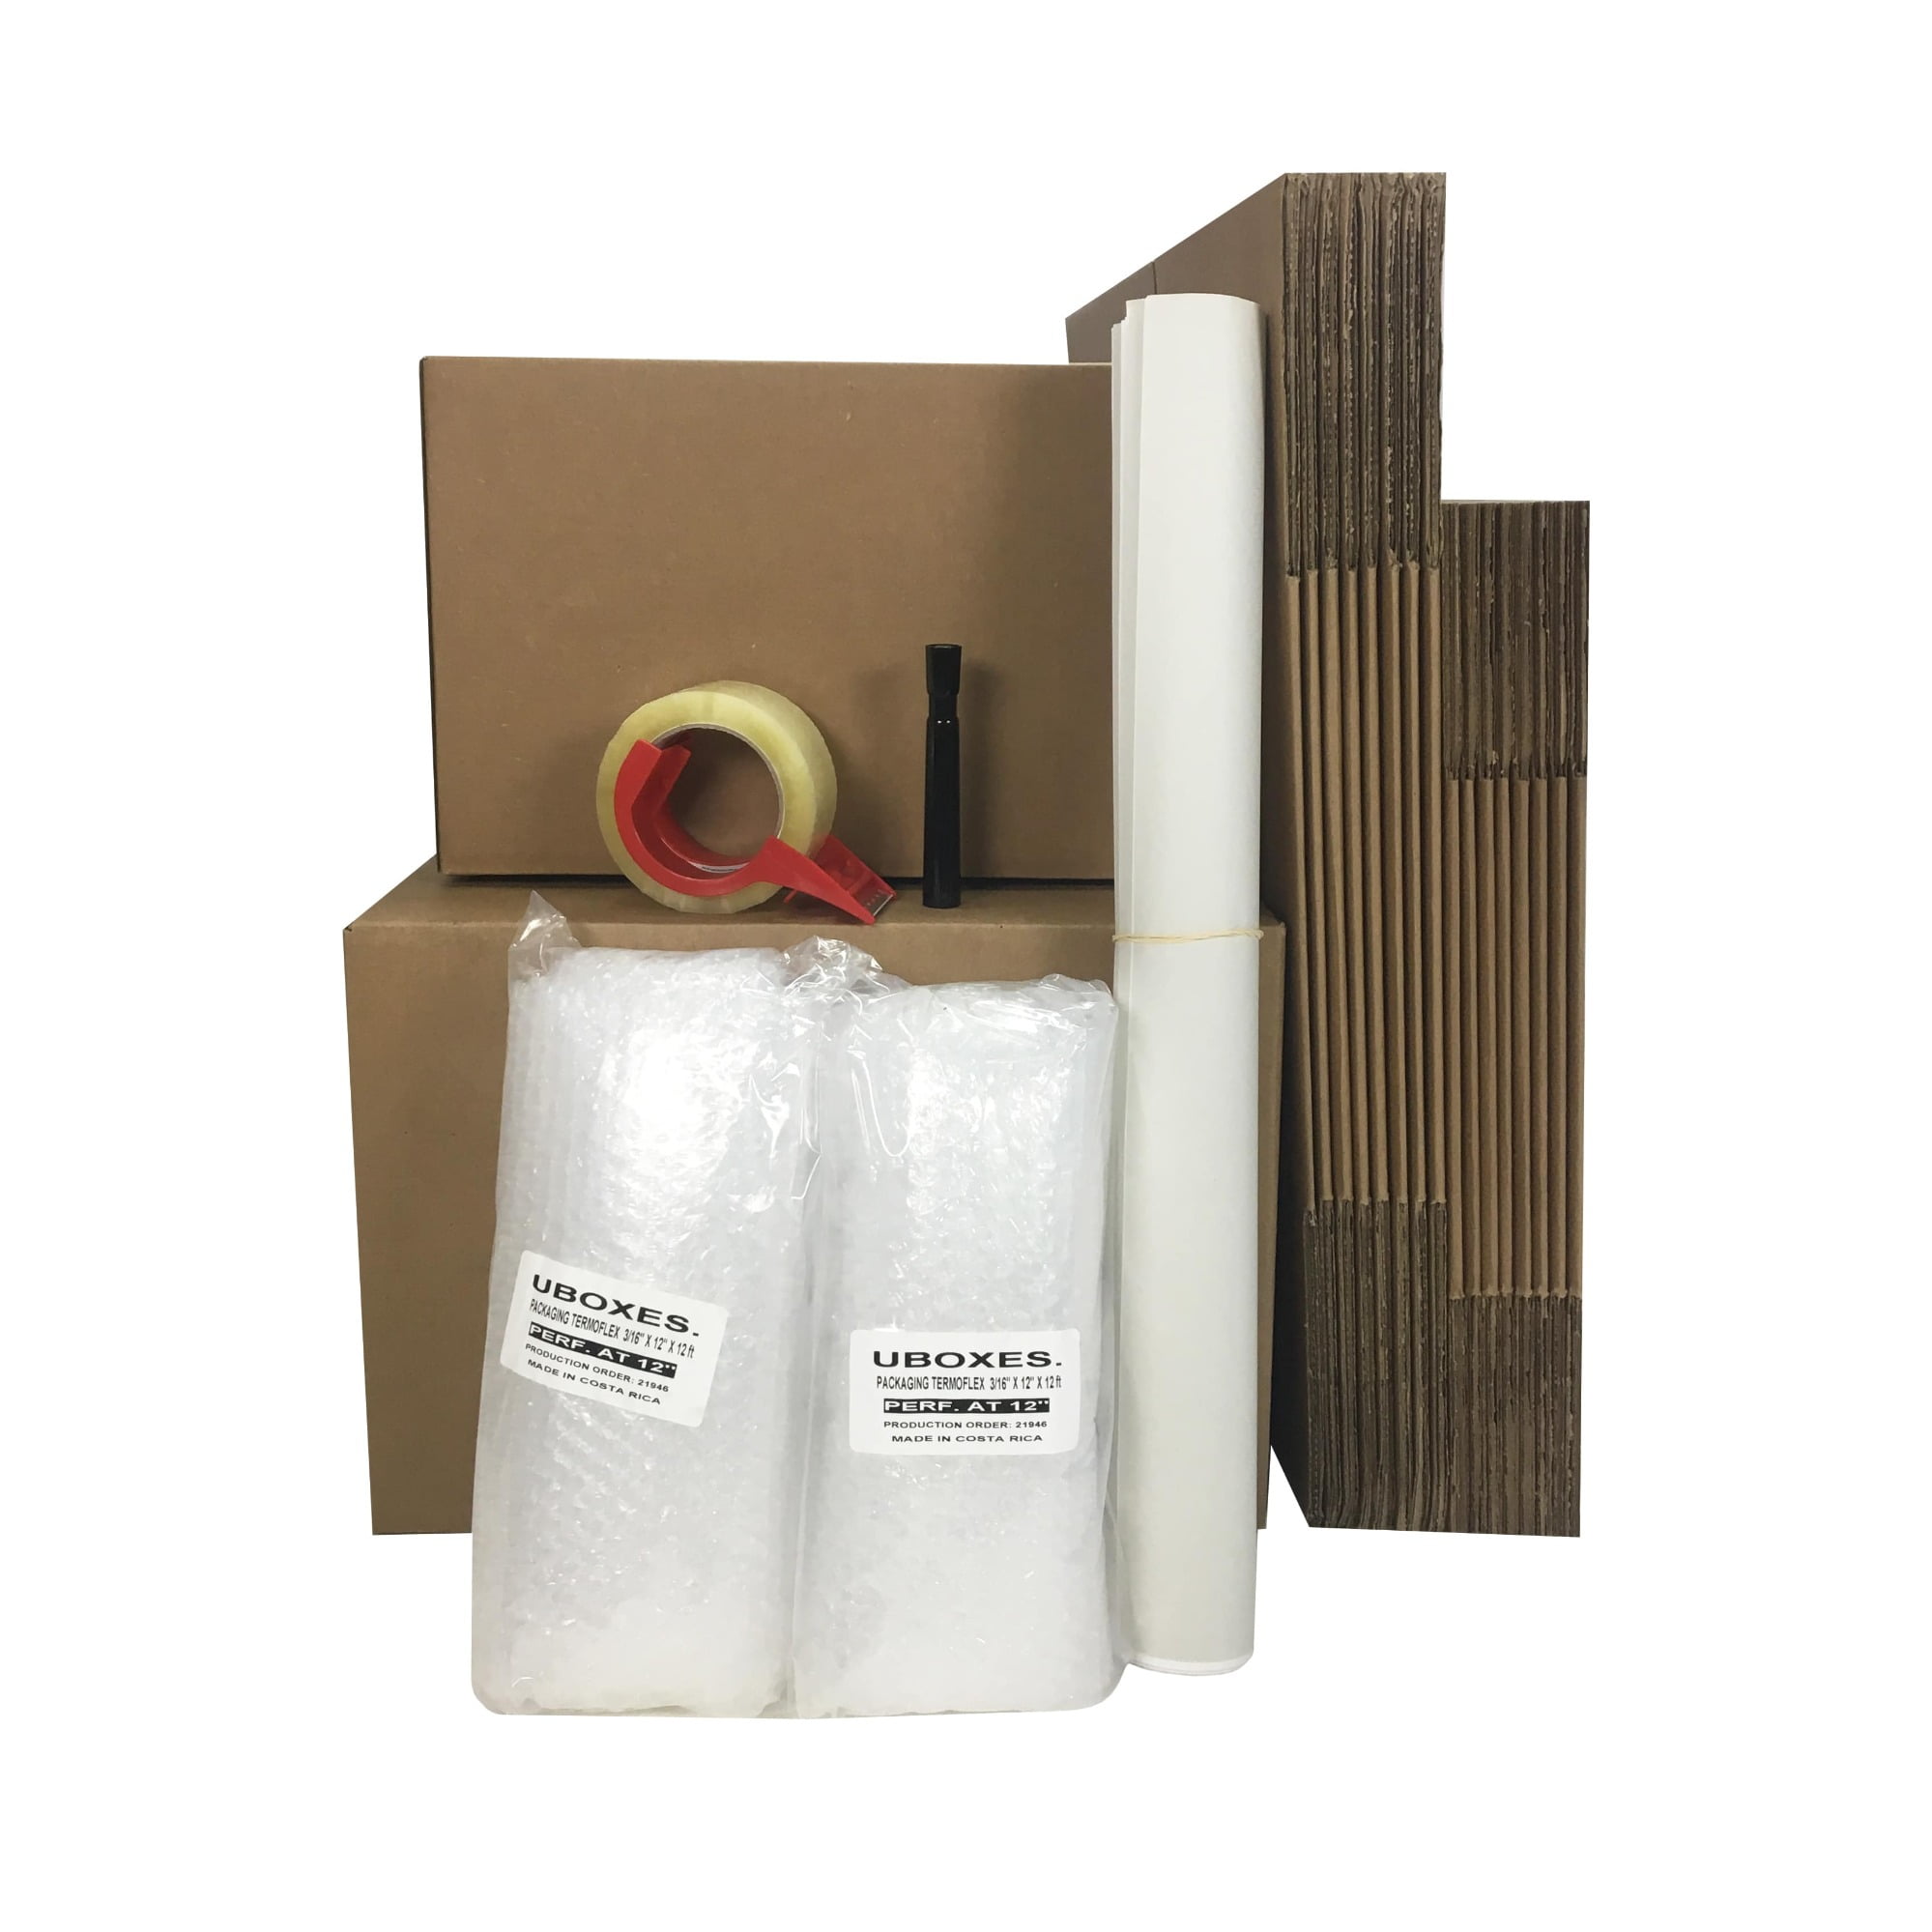 uBoxes Basic Moving Boxes Kit #1 + Supplies 18 Moving Boxes, Bubble, & Tape